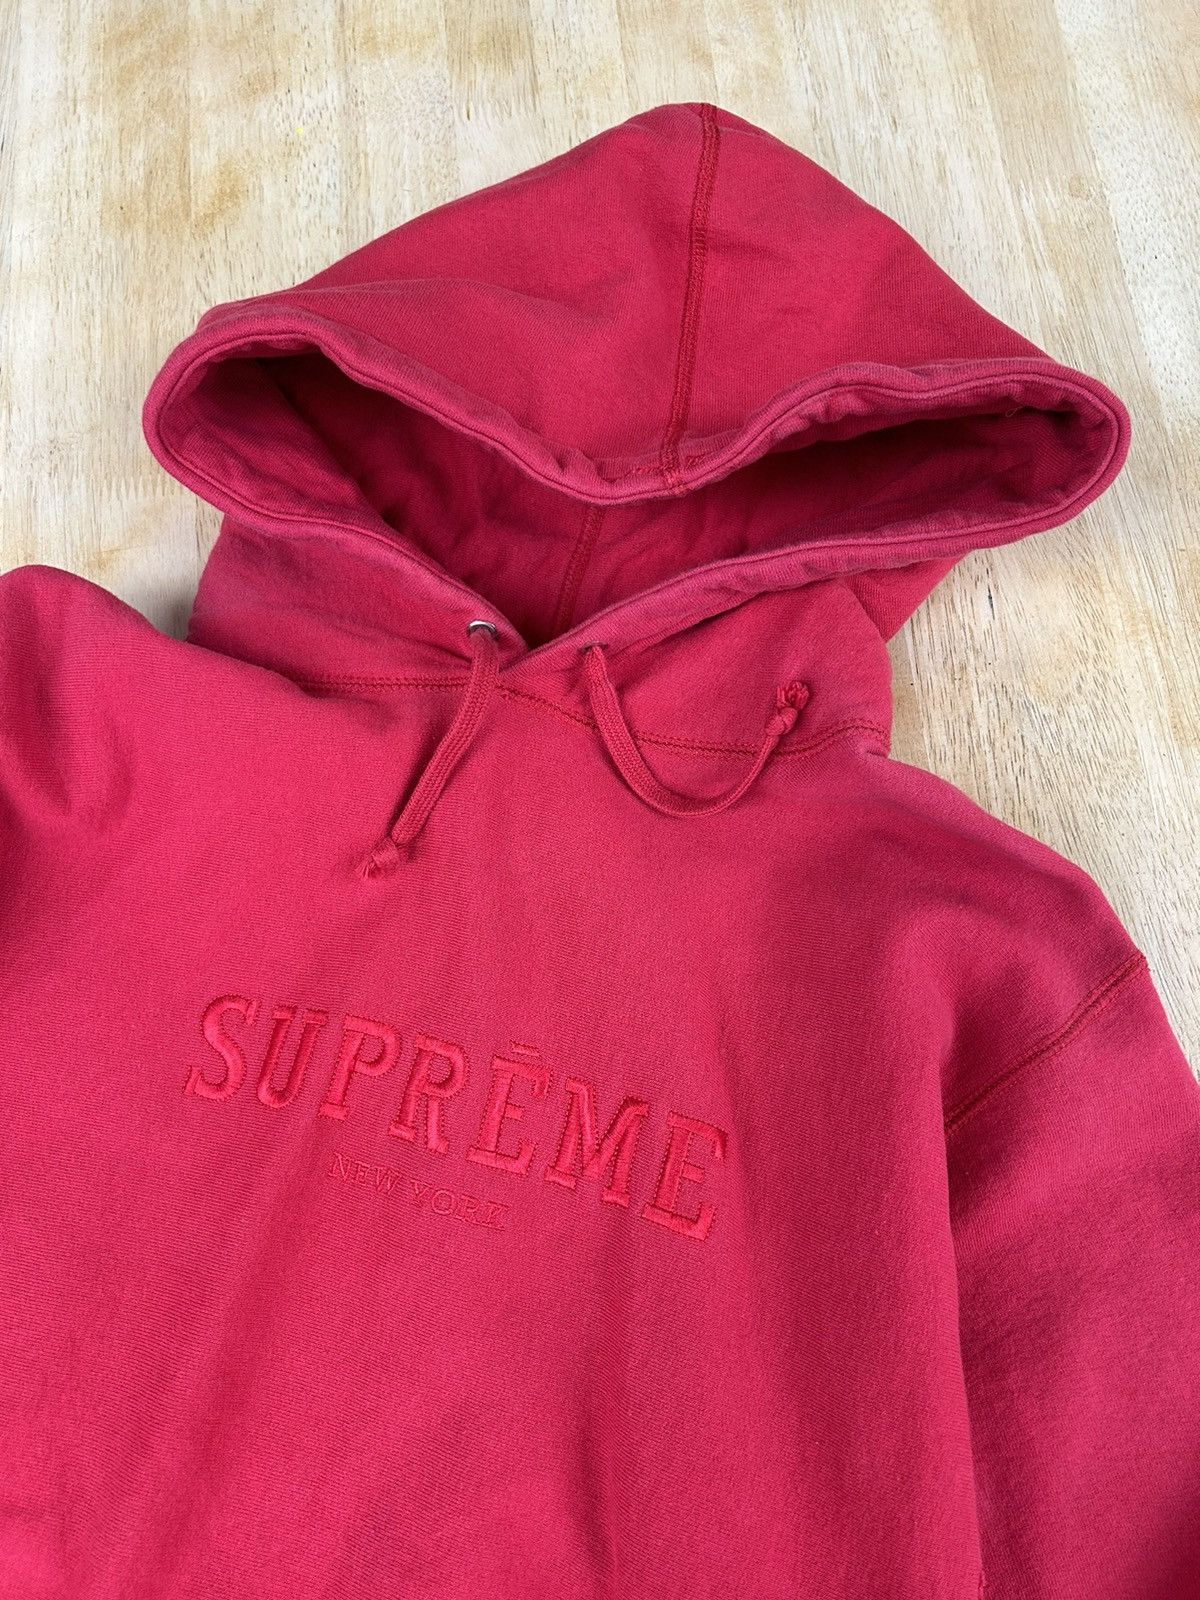 Supreme Supreme Atelier Hoodie FW12 Red Large | Grailed